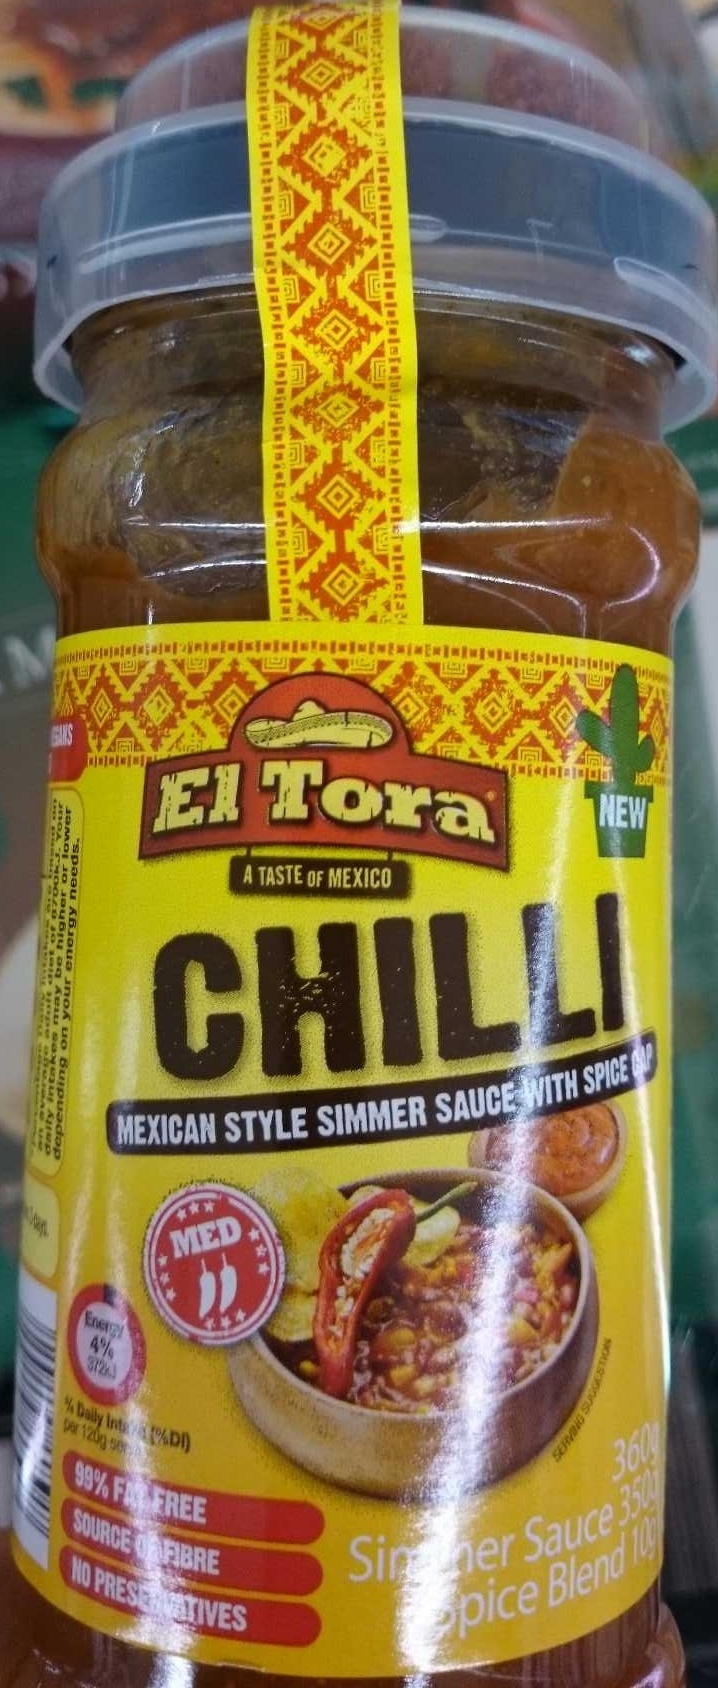 Chilli Mexican Style Simmer Sauce with Spice Cap Medium - Product